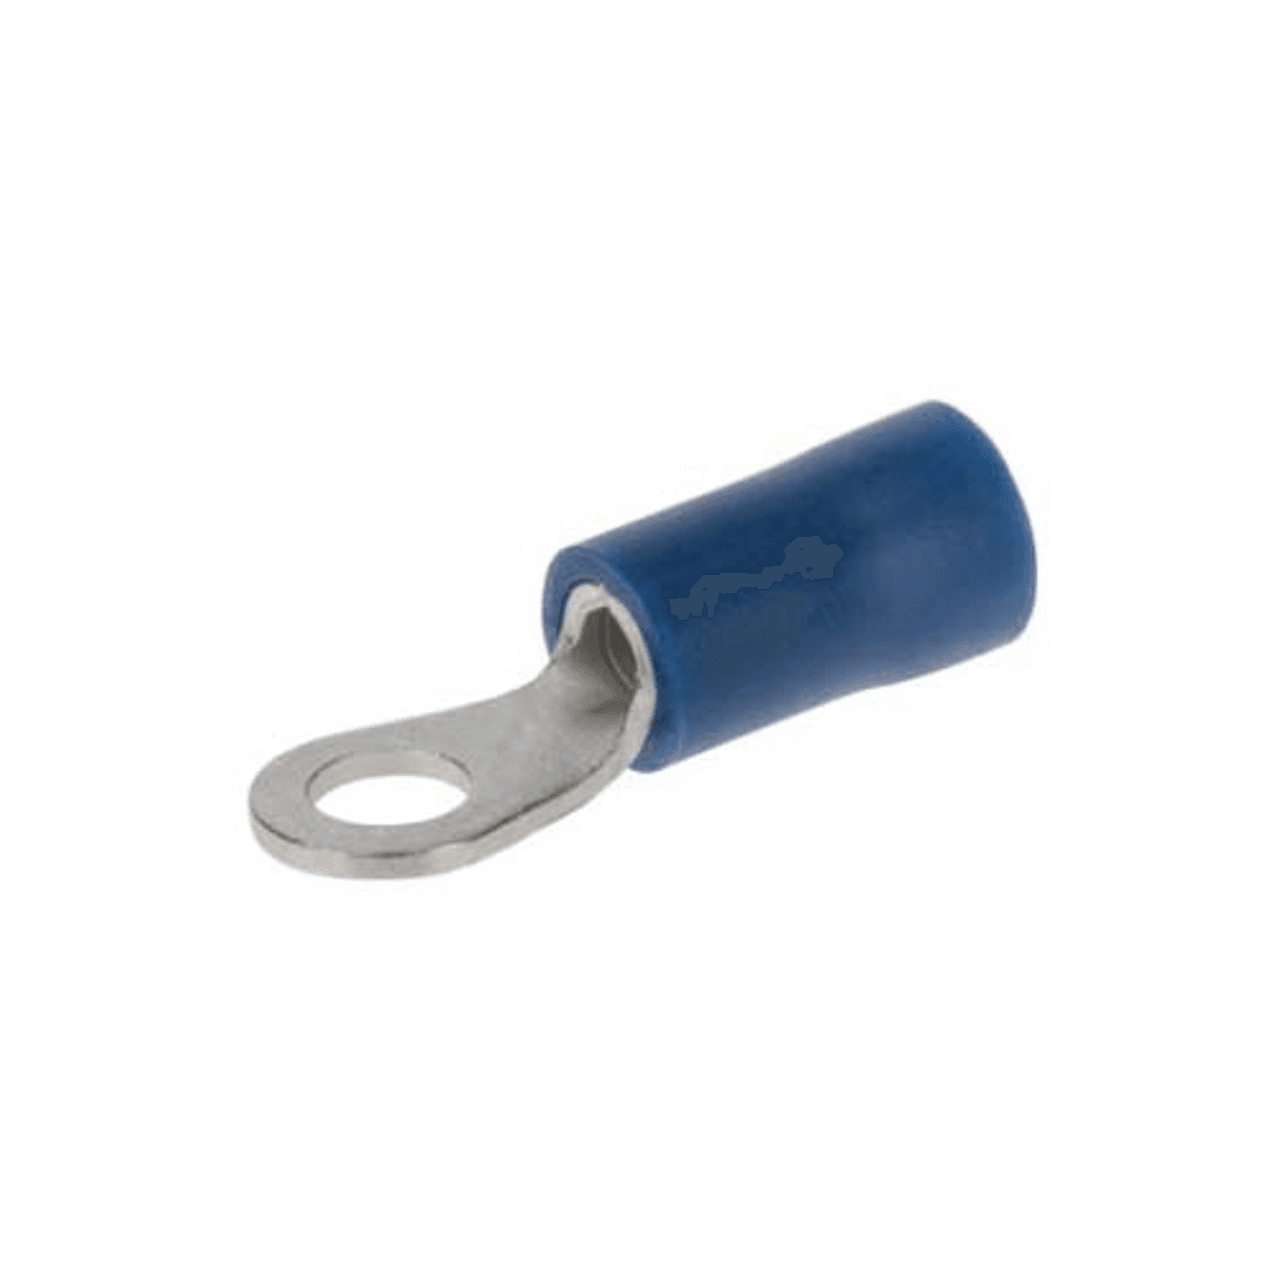 NSI Industries R16-6V-S #6 Stud, 300 V, 0.767" x 0.259", 16 to 14 AWG, Blue, Electro Tin Plated Copper, Vinyl Insulated, Butted Seam